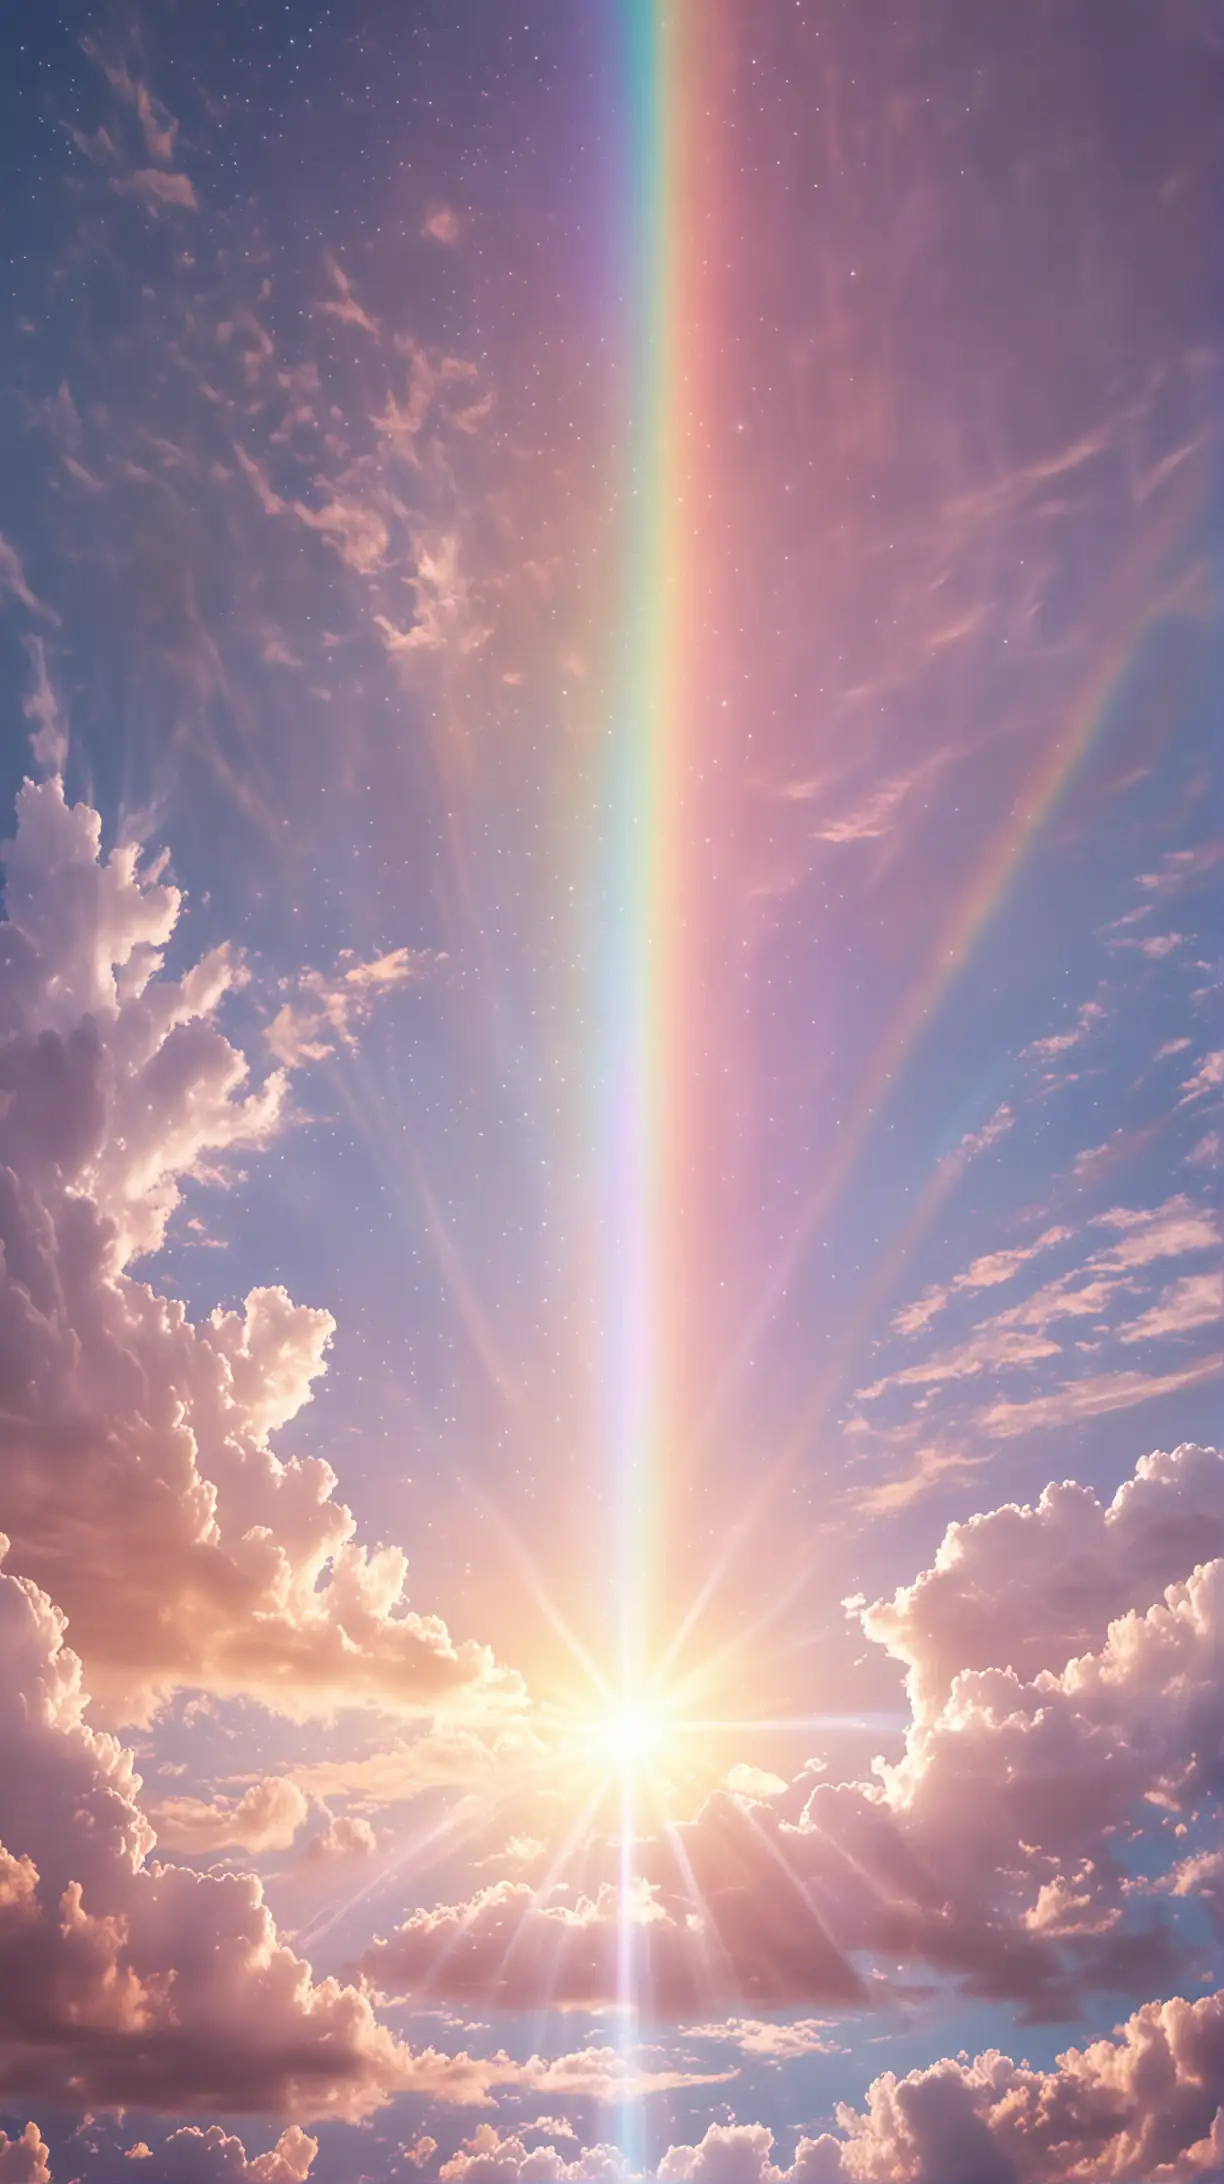 Ethereal Pastel Rainbow Sky with Heavenly Light Beam